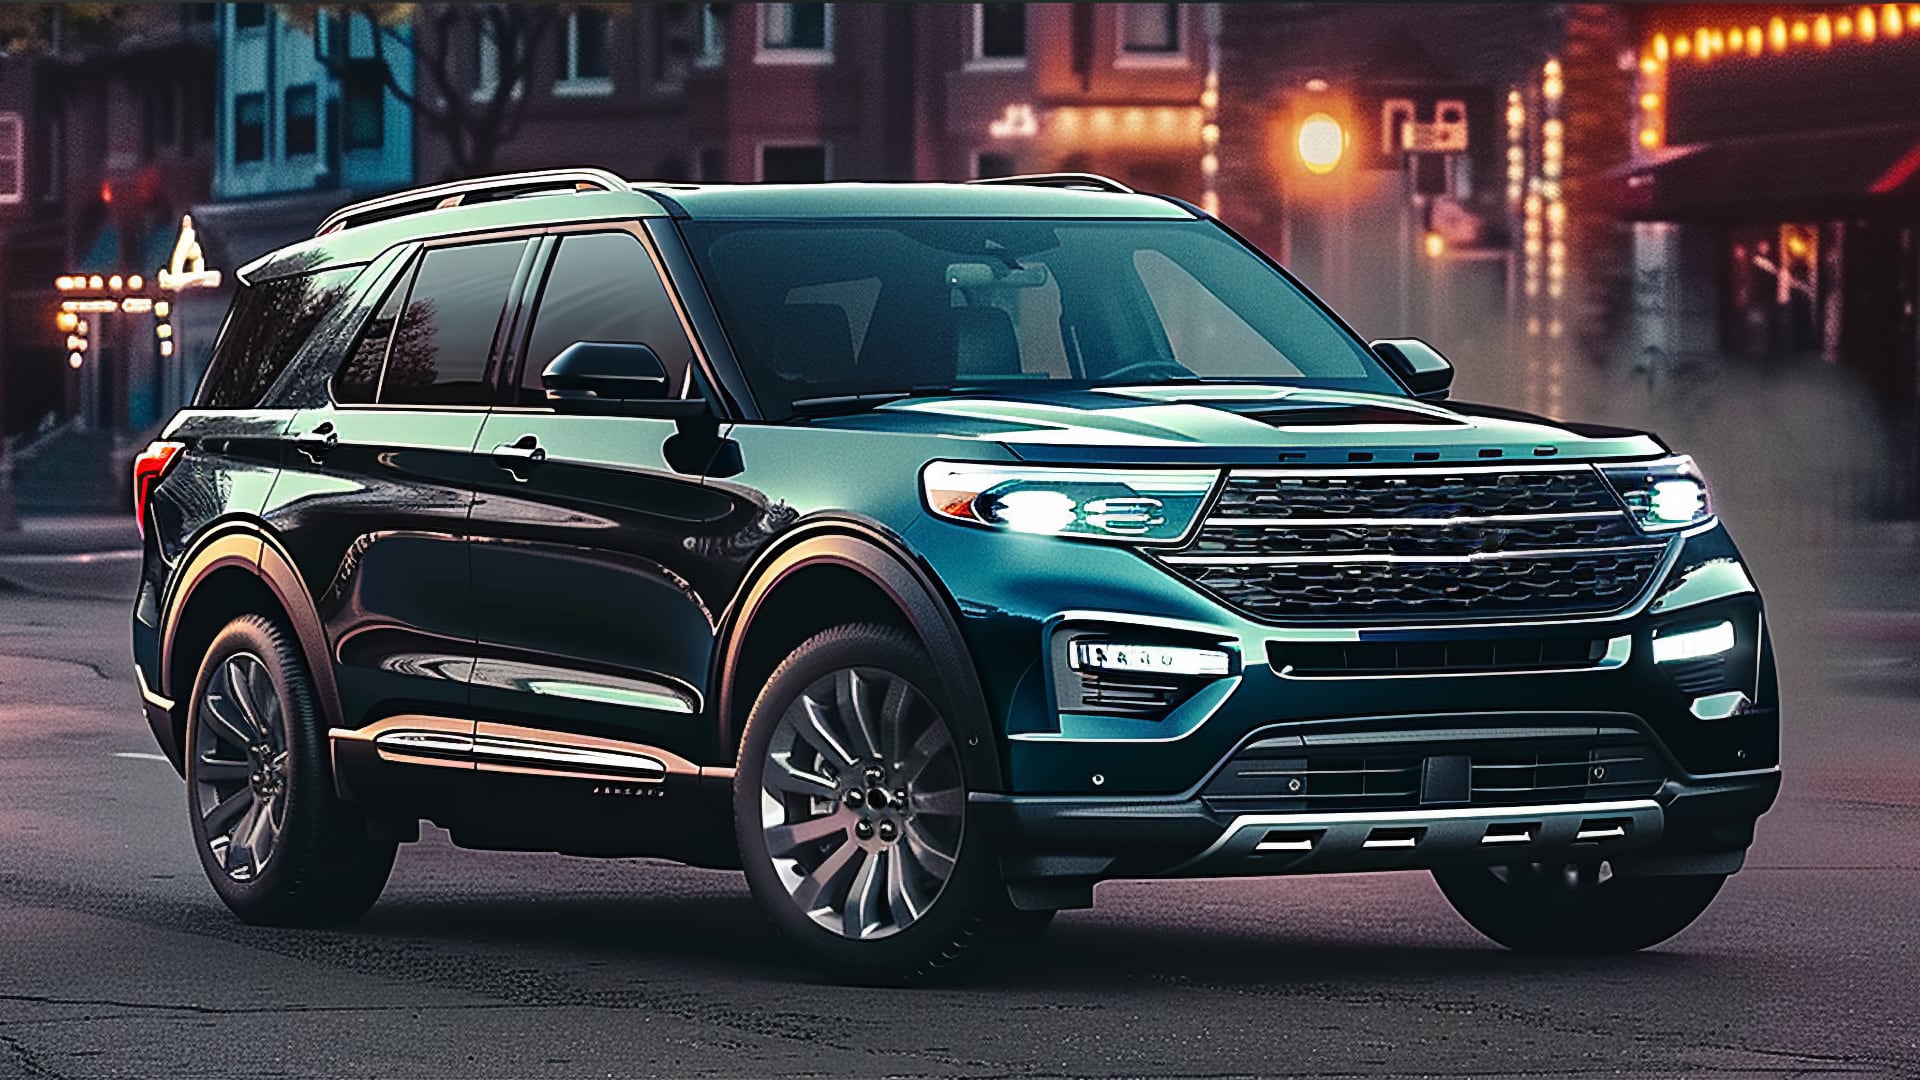 The 2020 Ford Explorer, a model from the years to avoid, is driving down the street at night.